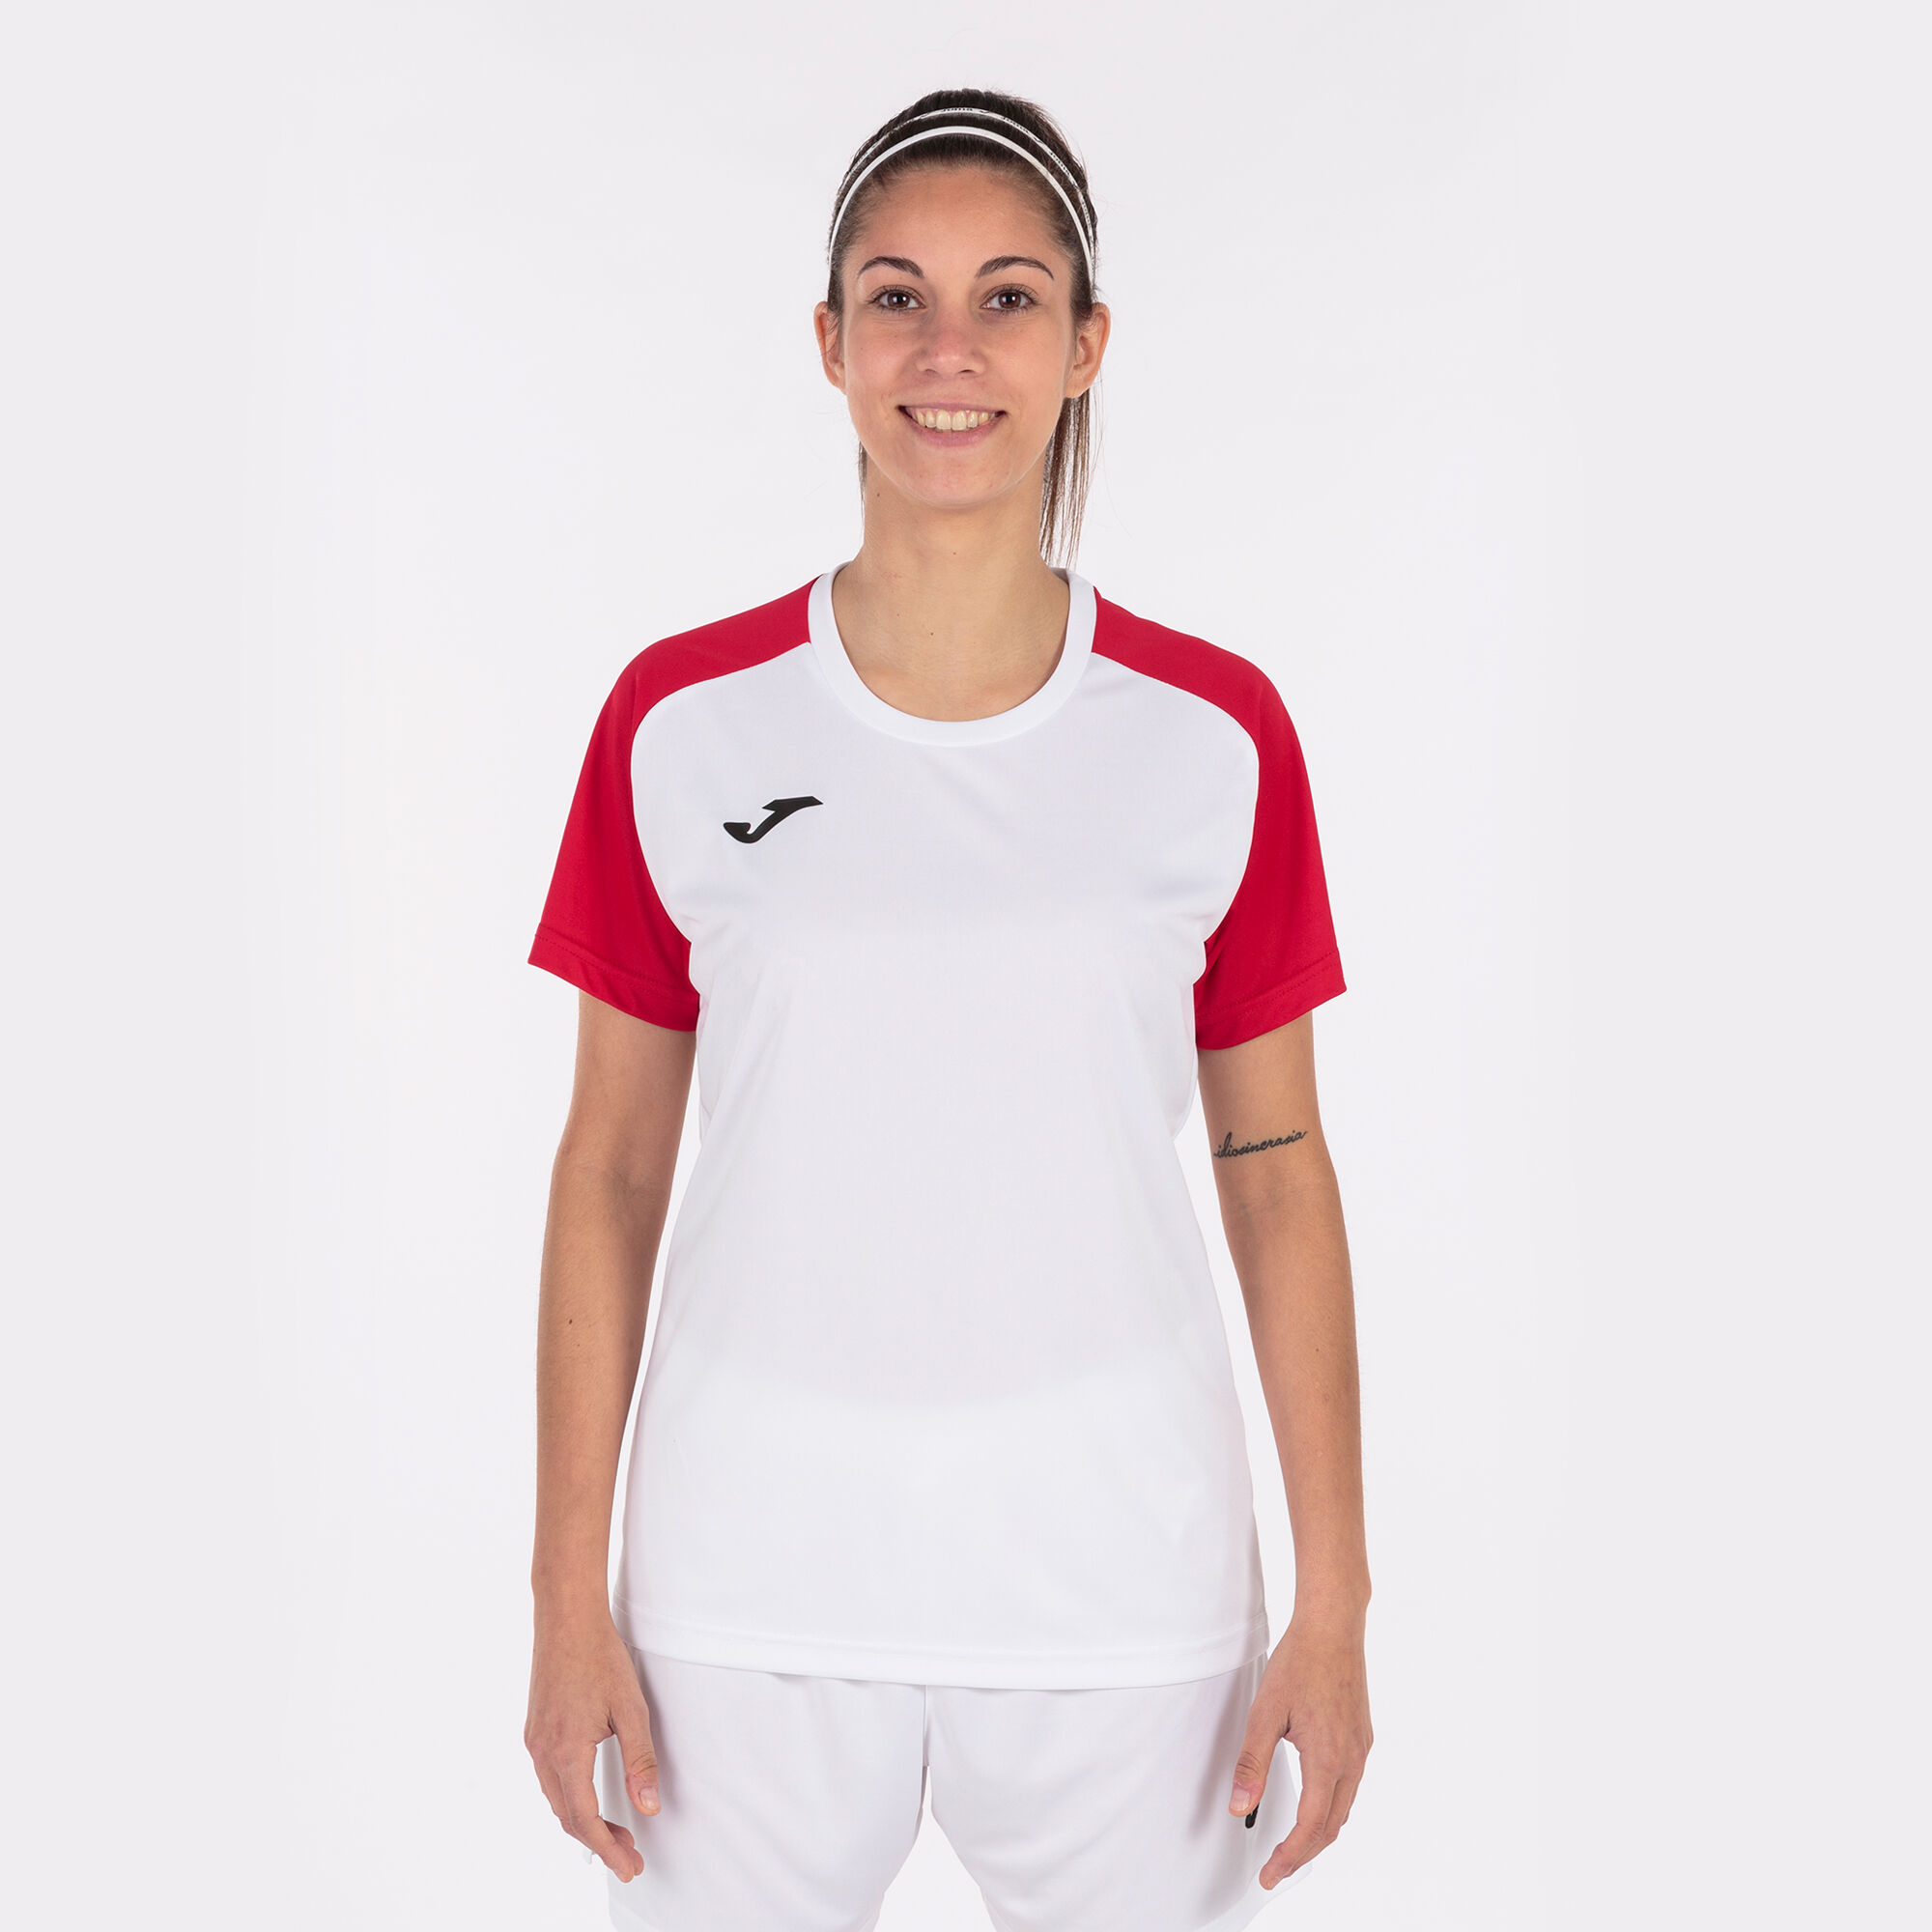 Maillot manches courtes femme Academy IV blanc rouge